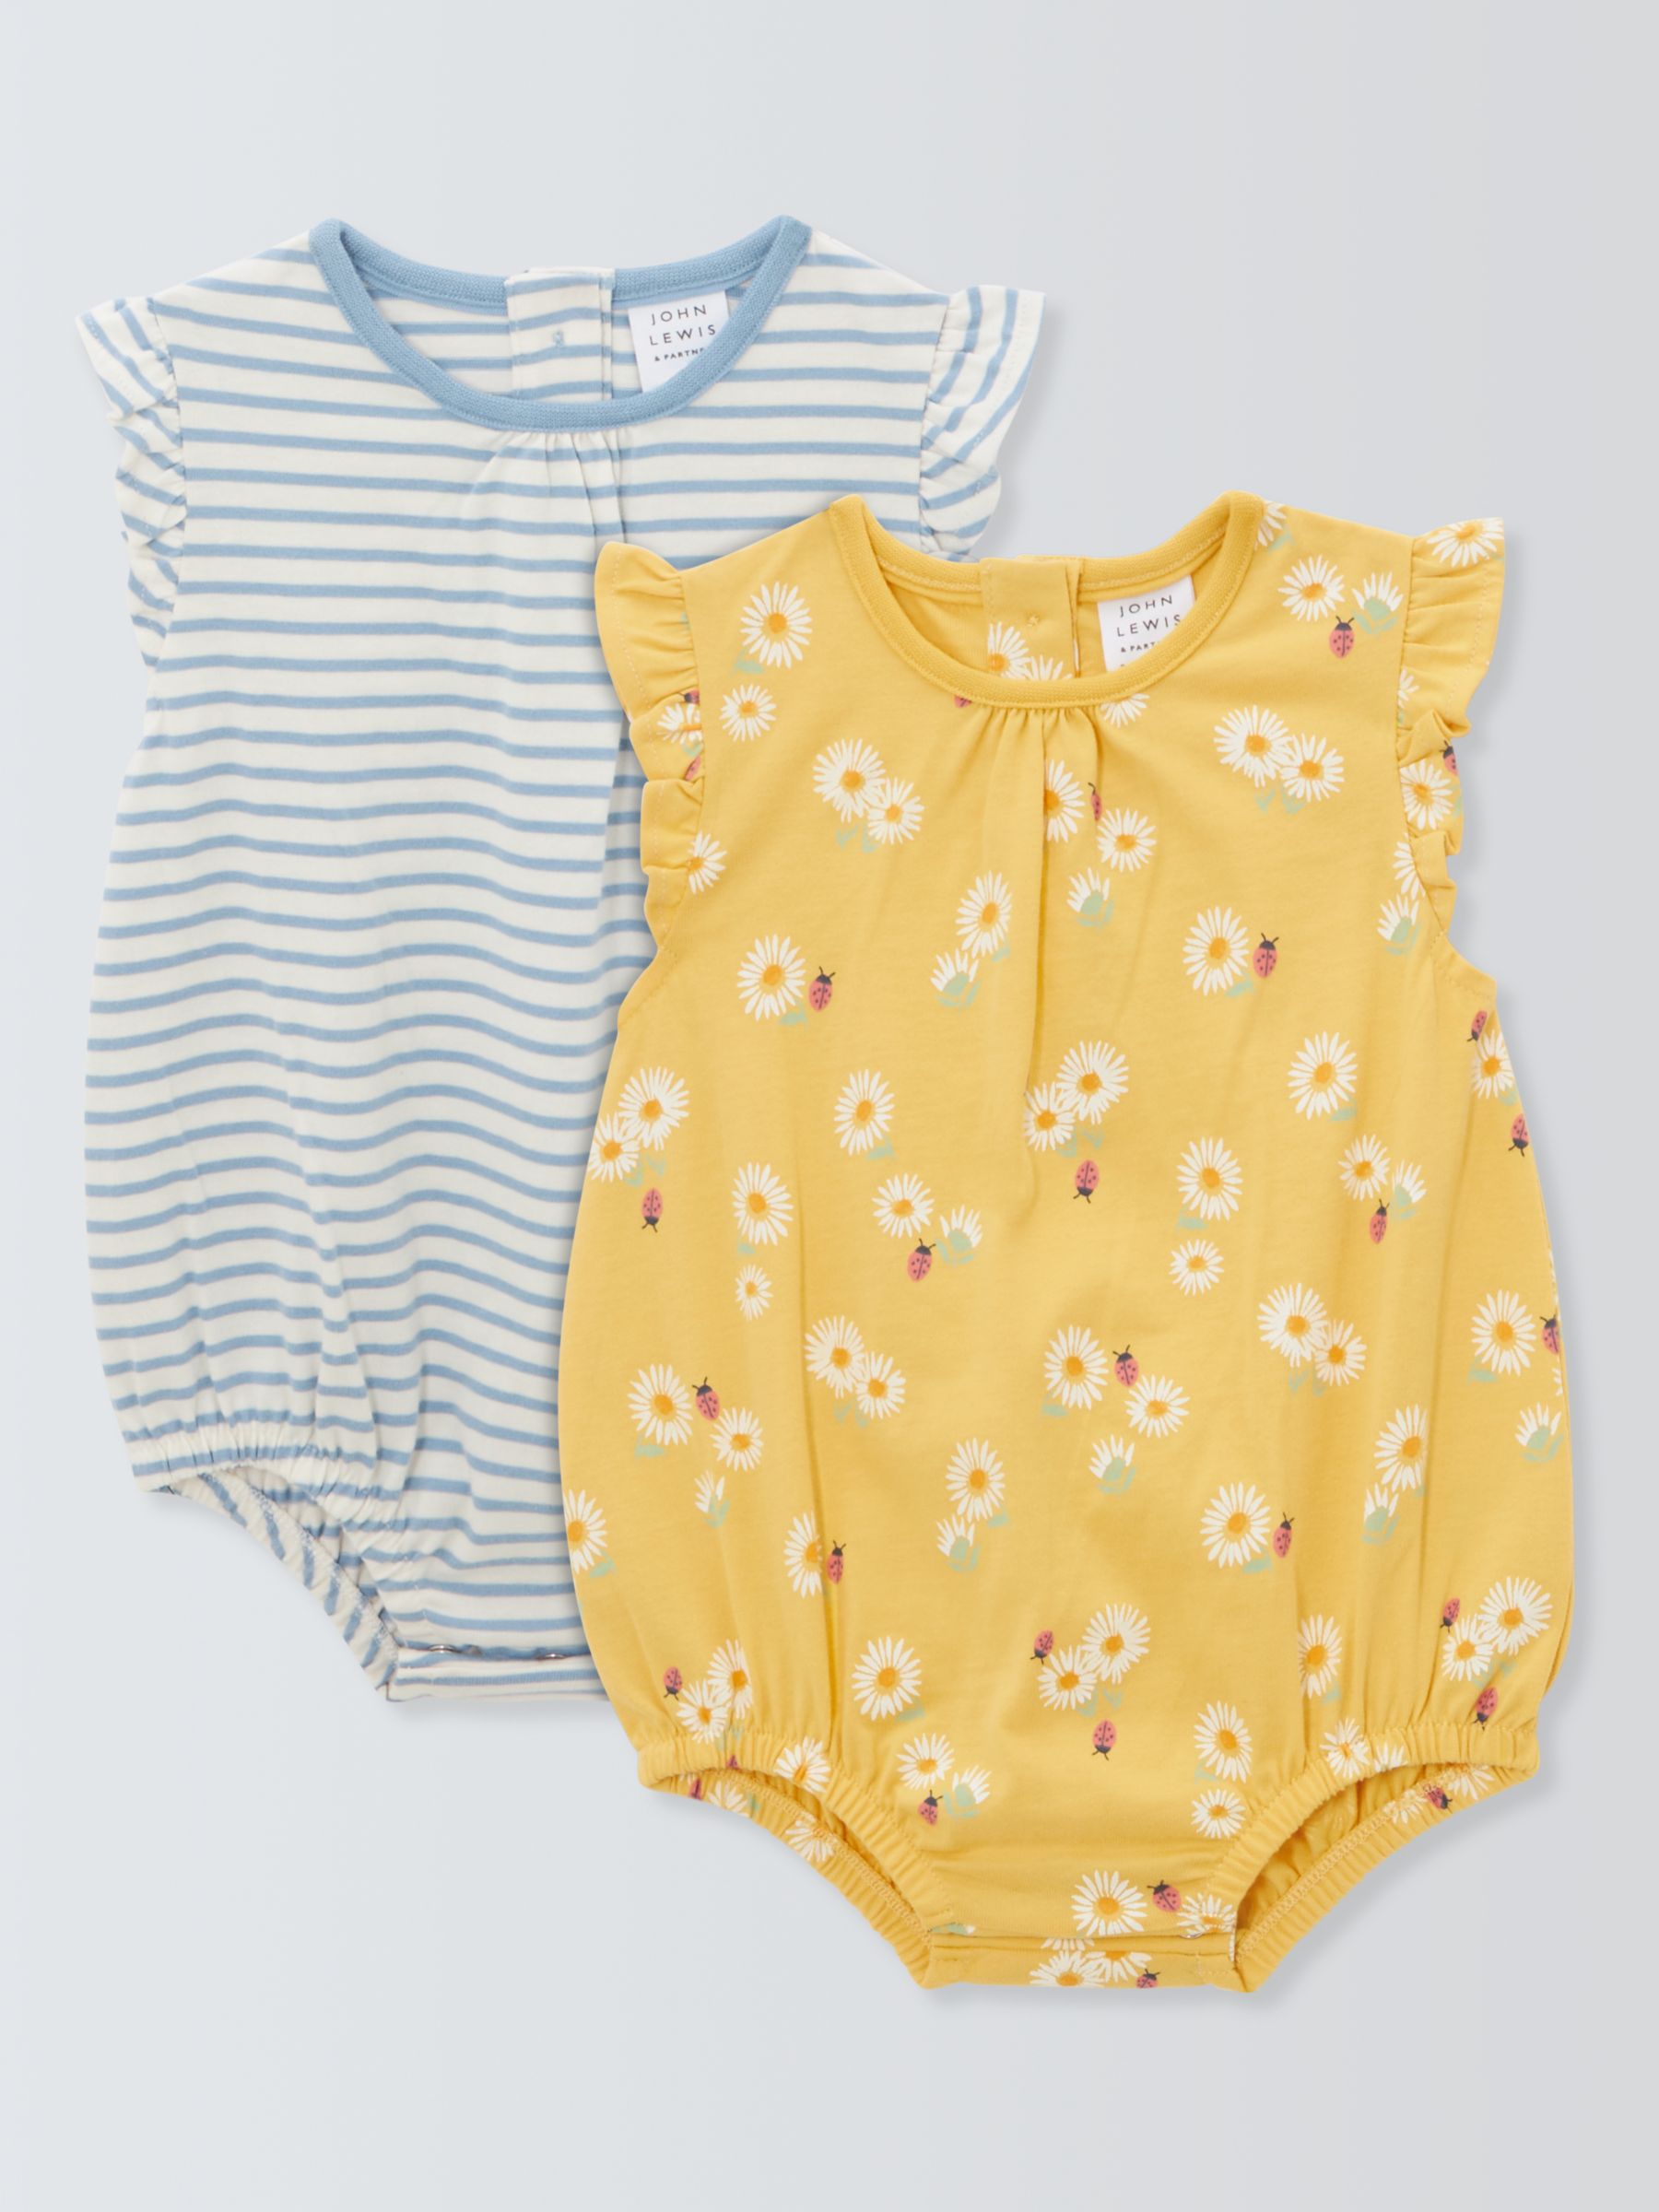 John Lewis Baby Floral Stripe Ruffle Bodysuits, Pack of 2, Multi, 6-9 months